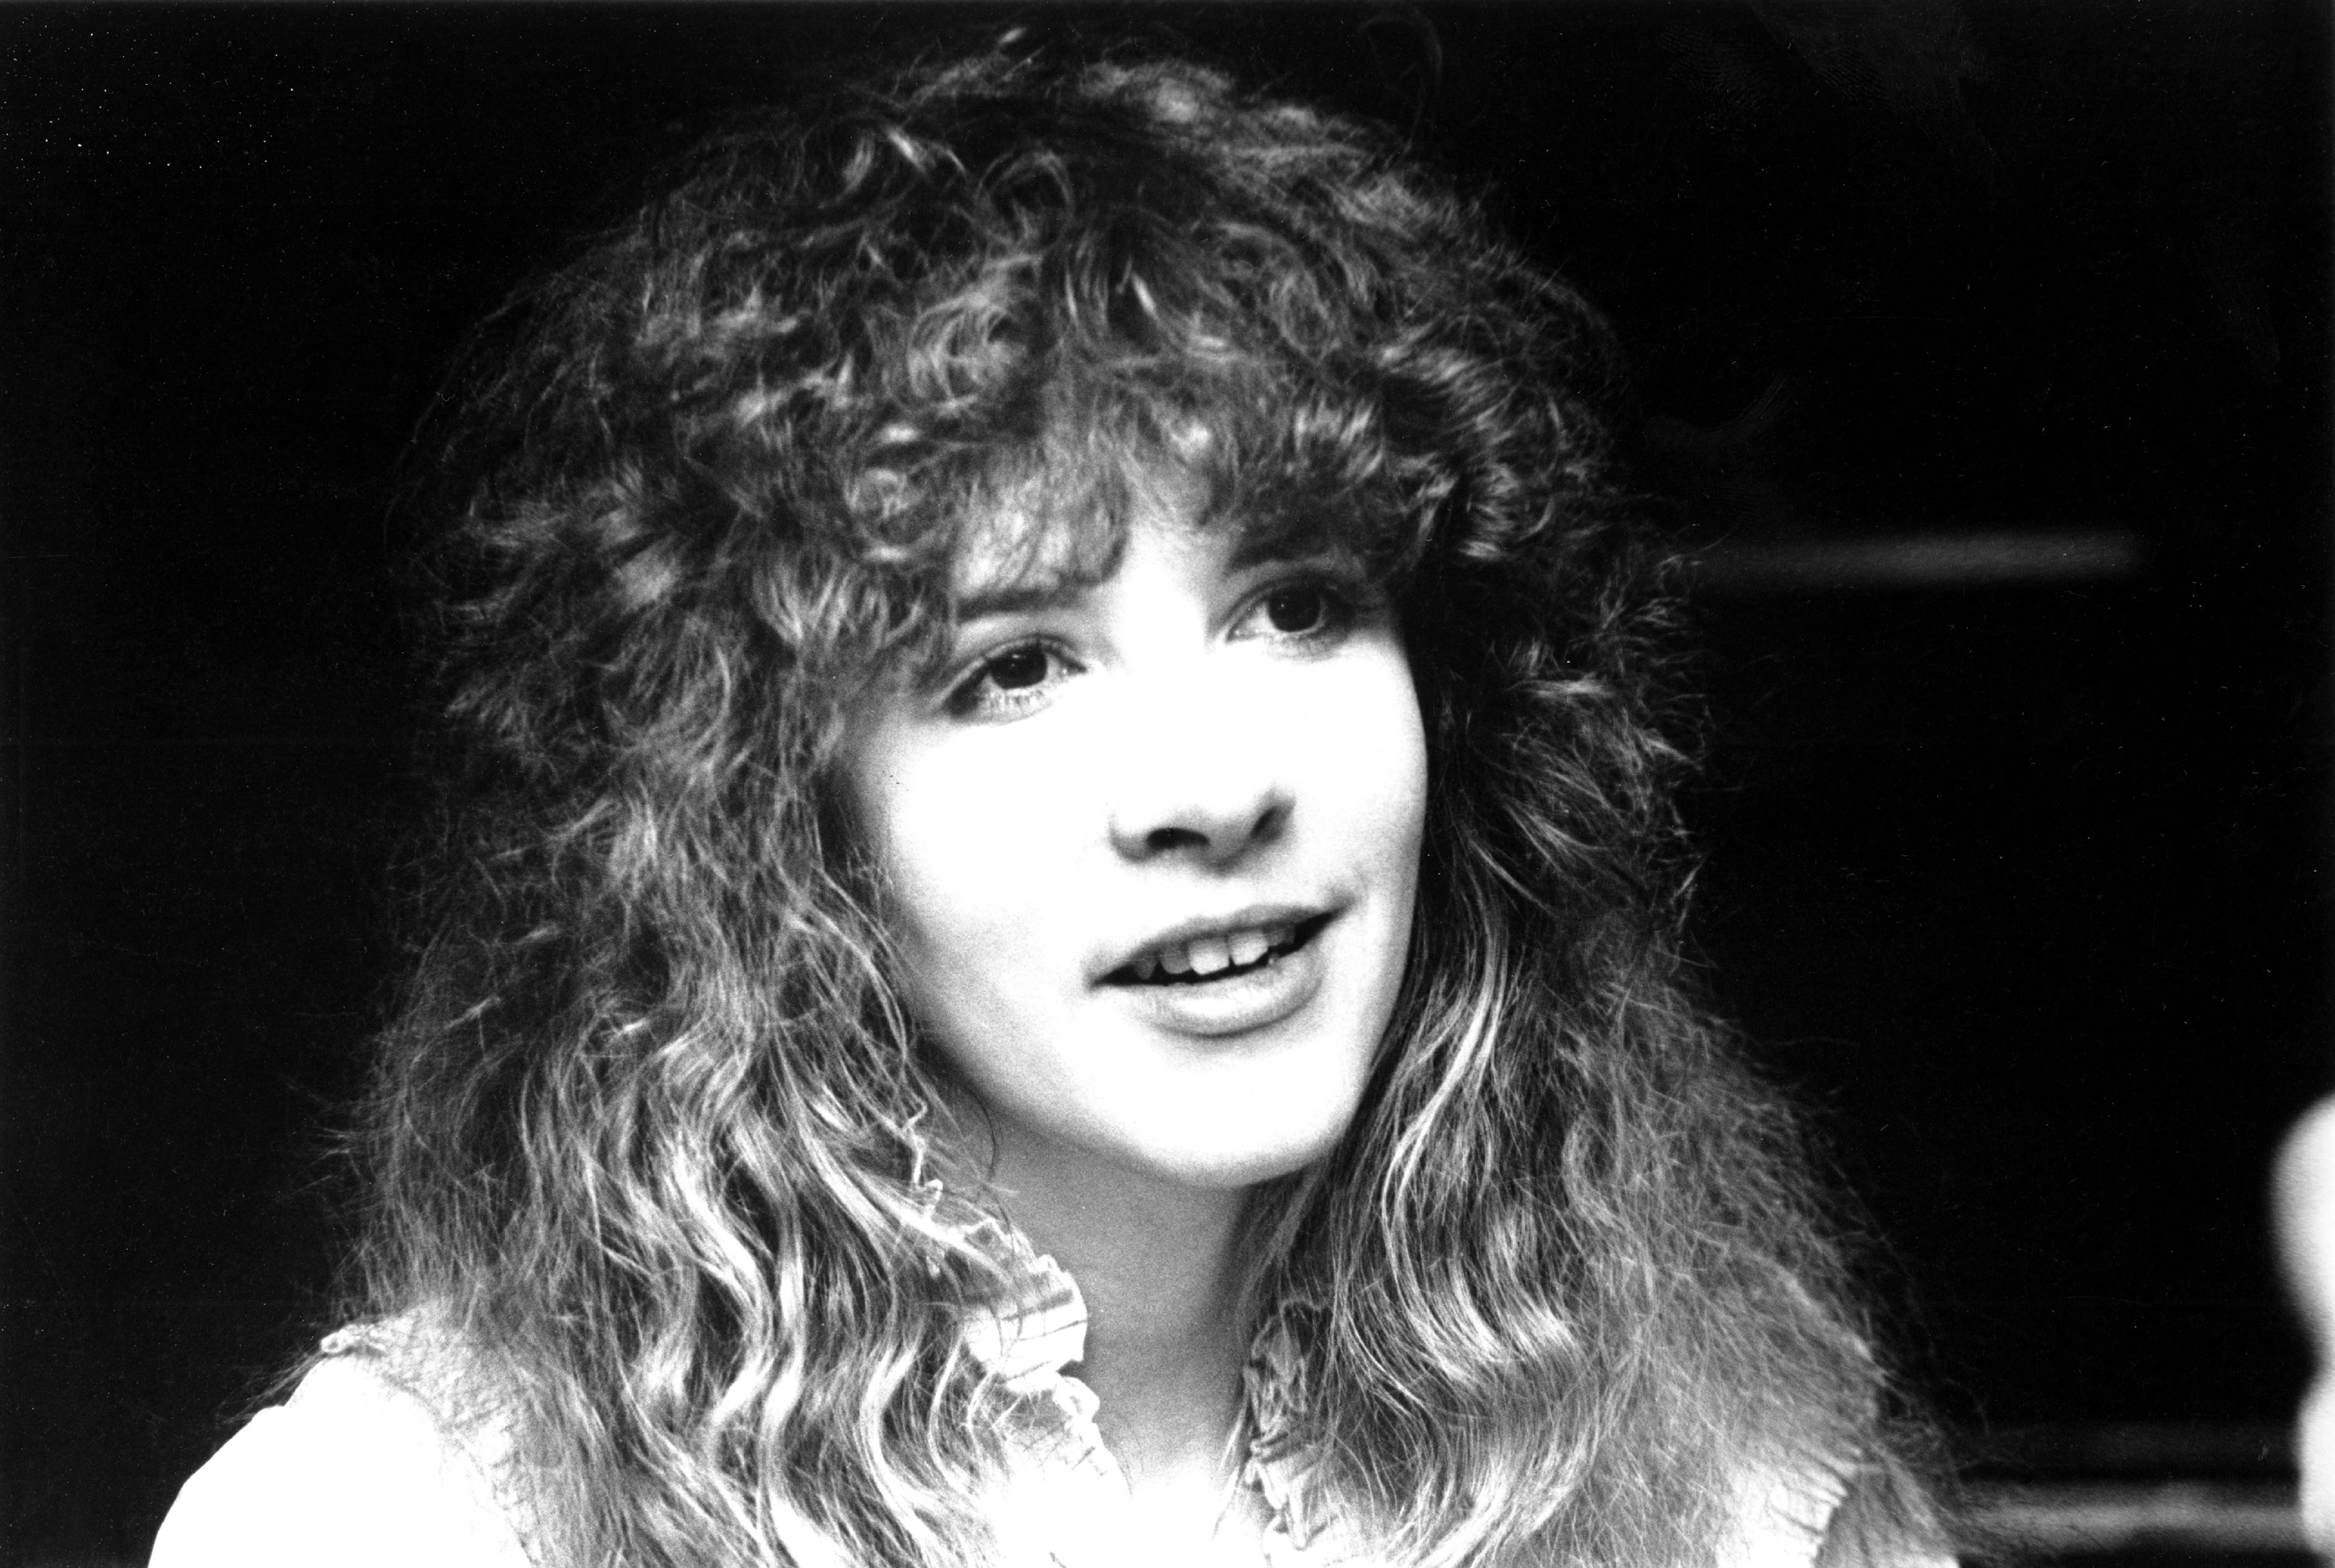 Stevie Nicks with her mouth open